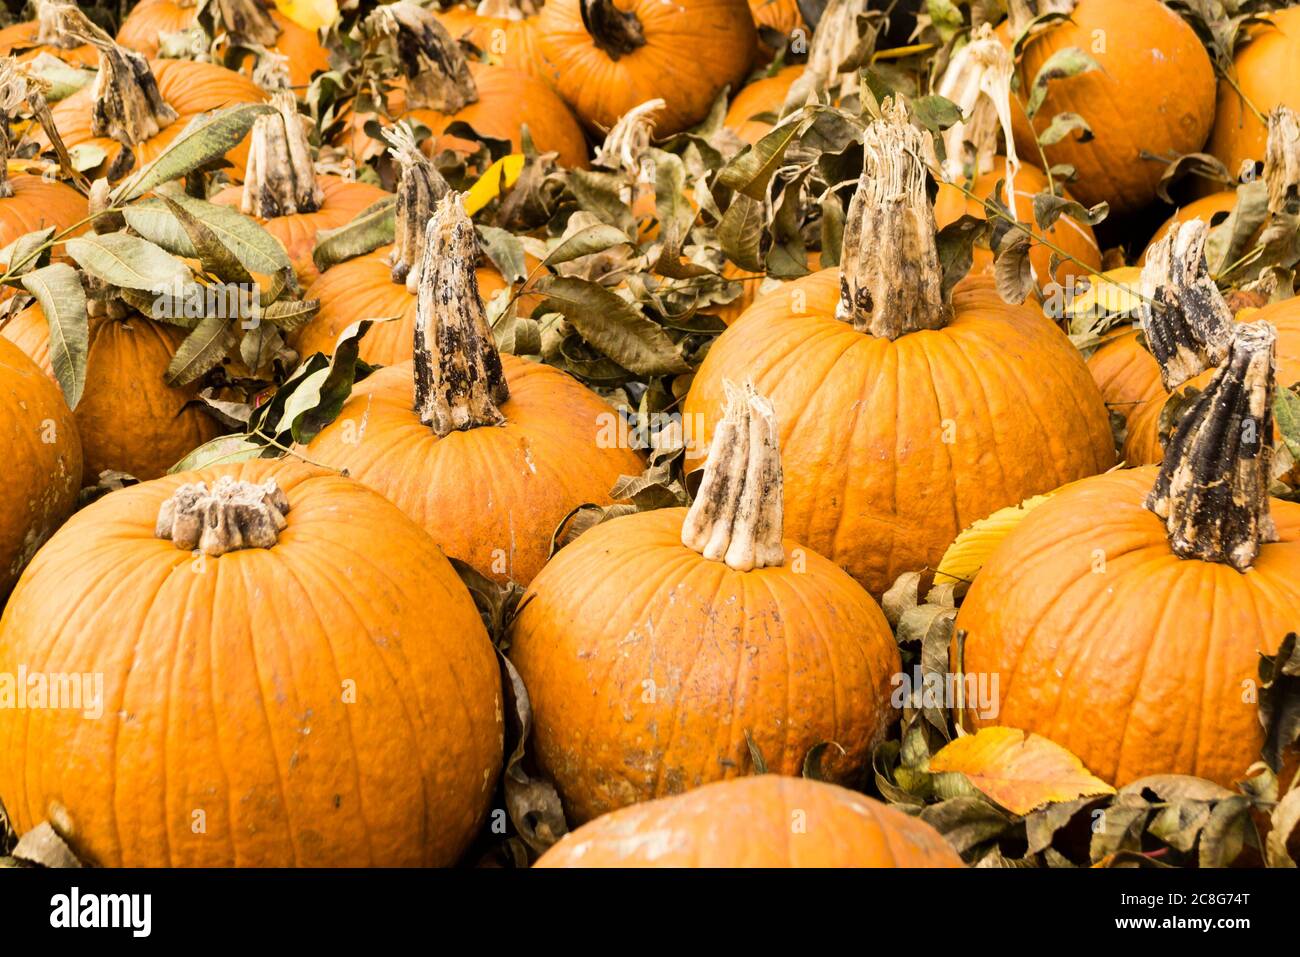 Bunch of Pumpkins on Ground Stock Photo